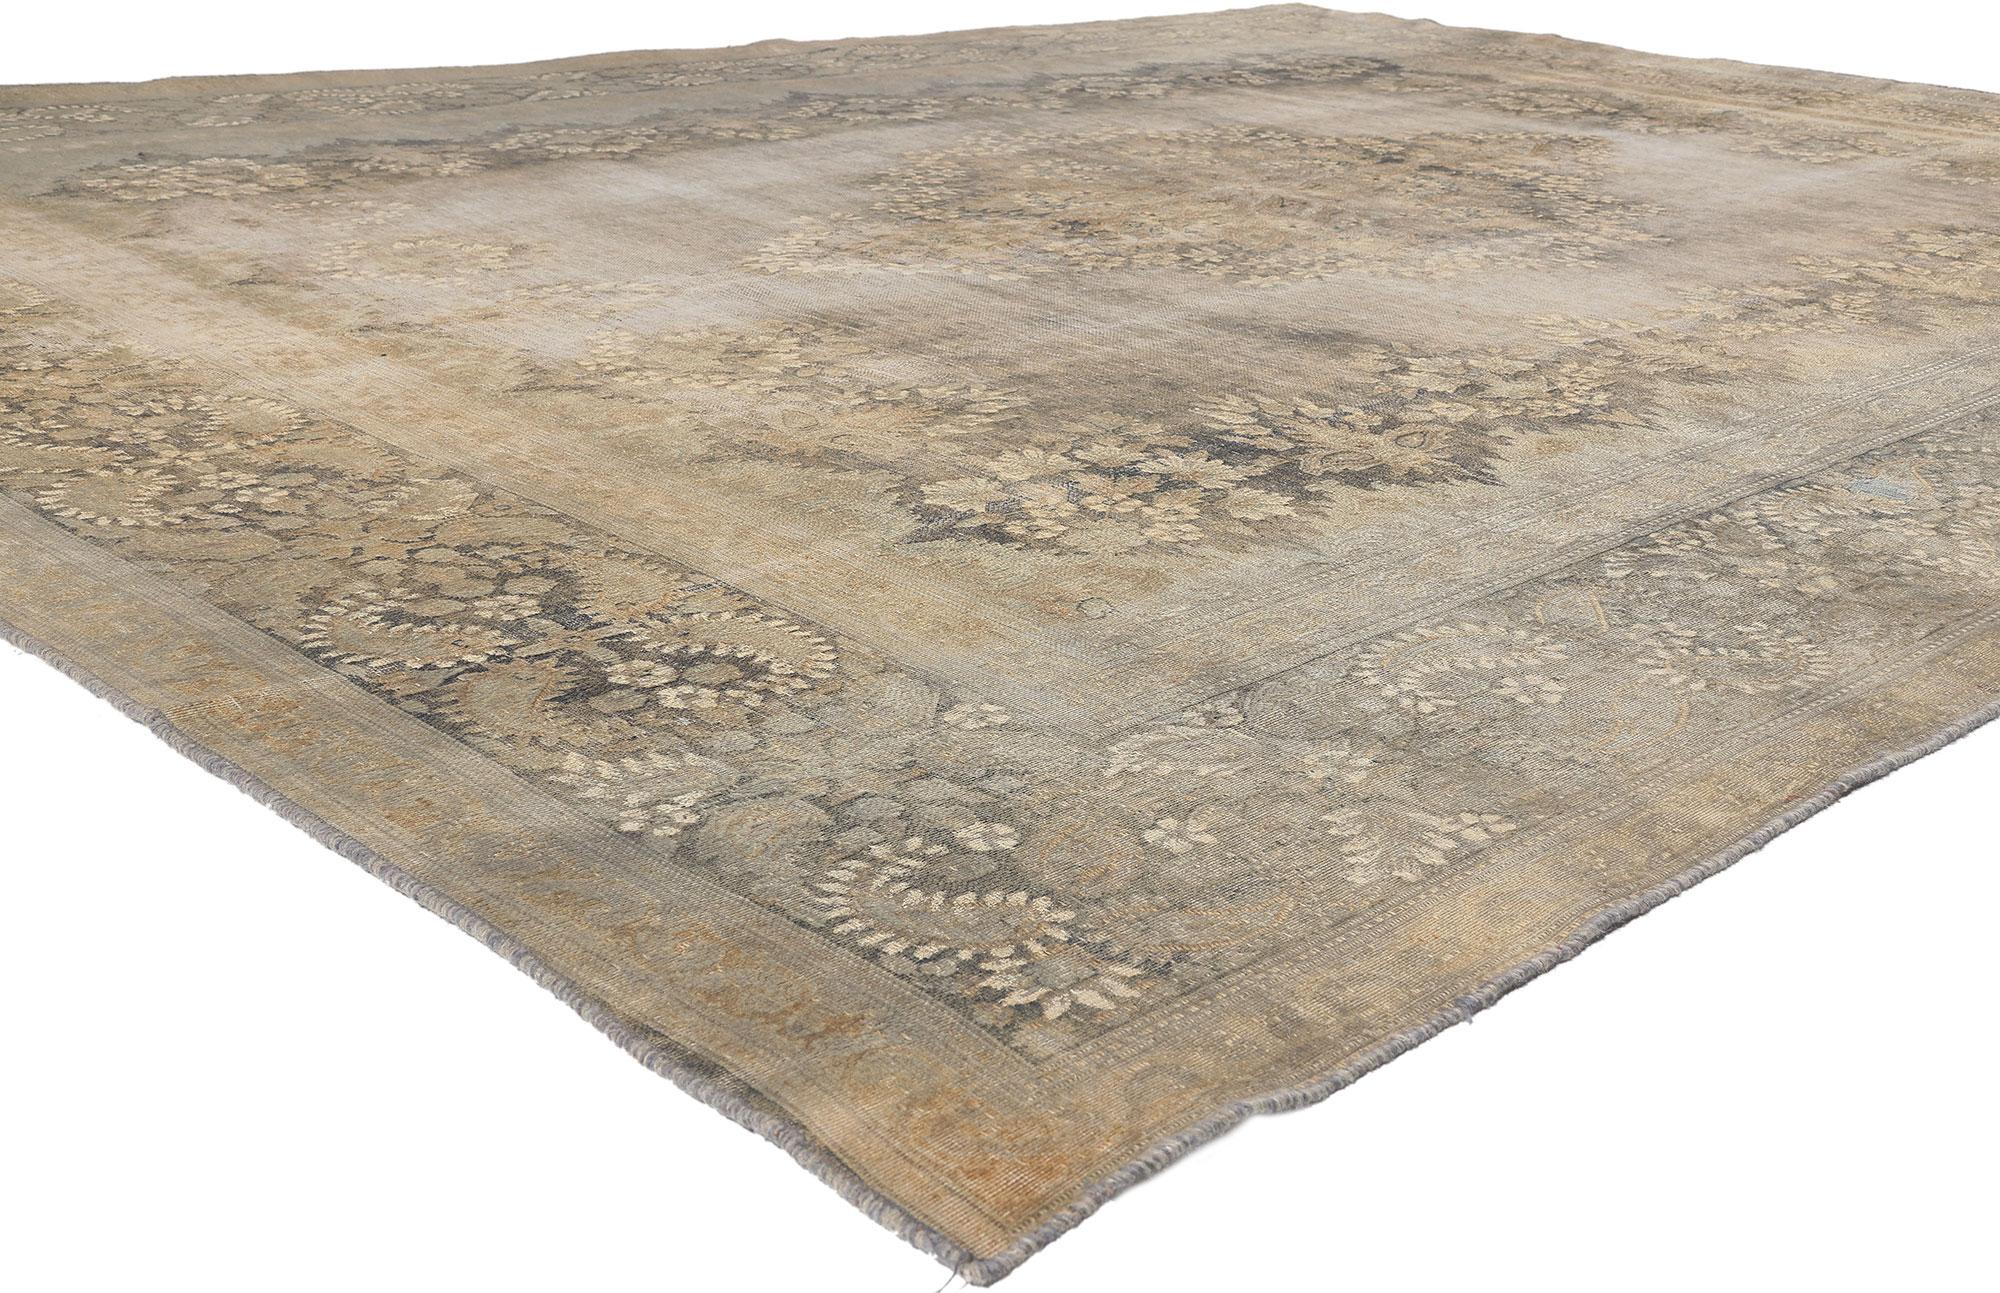 60762 Vintage Turkish Overdyed Rug, 09’05 x 12’10.
Get ready for a design tango where Colonial Revival meets the softer side of Modern Industrial – it's like the ultimate dance-off for your floors. This vintage Turkish rug isn't just a floor